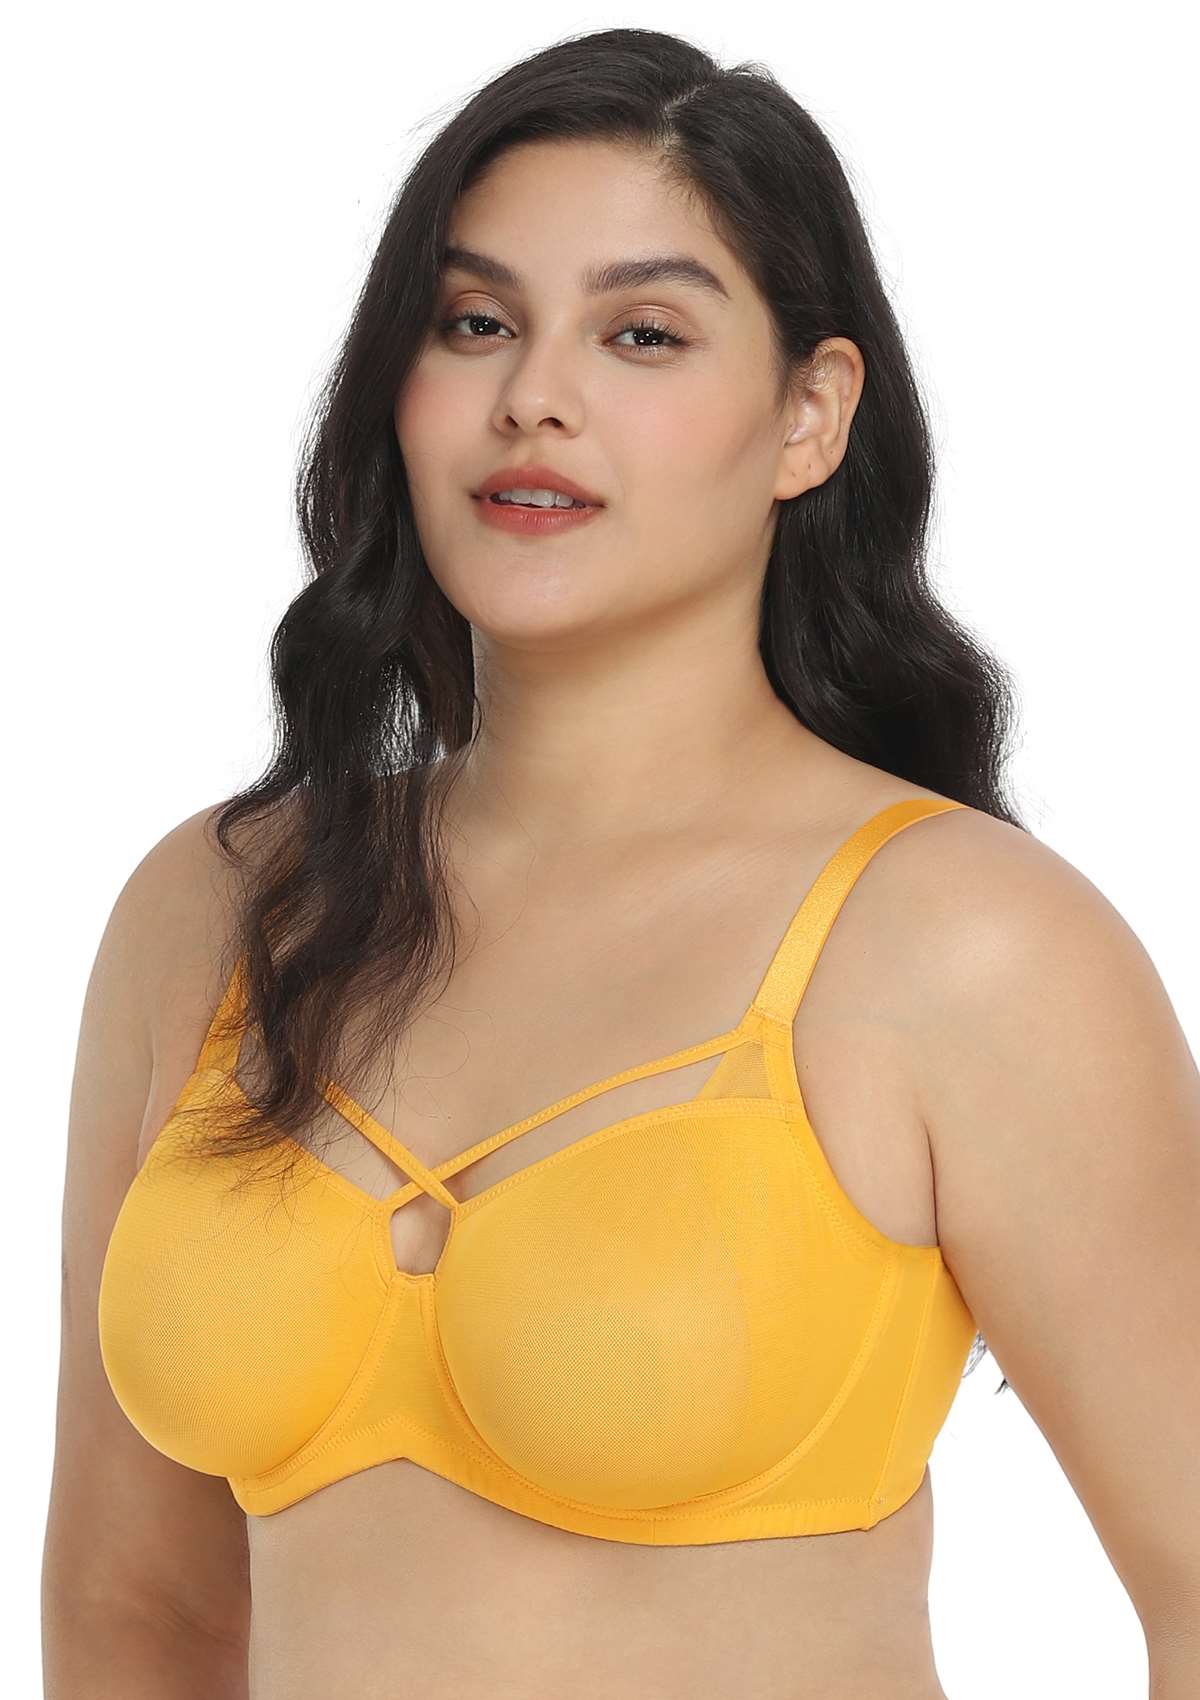 HSIA Billie Cross Front Strap Smooth Sheer Mesh Comfy Underwire Bra - Yellow / 42 / D